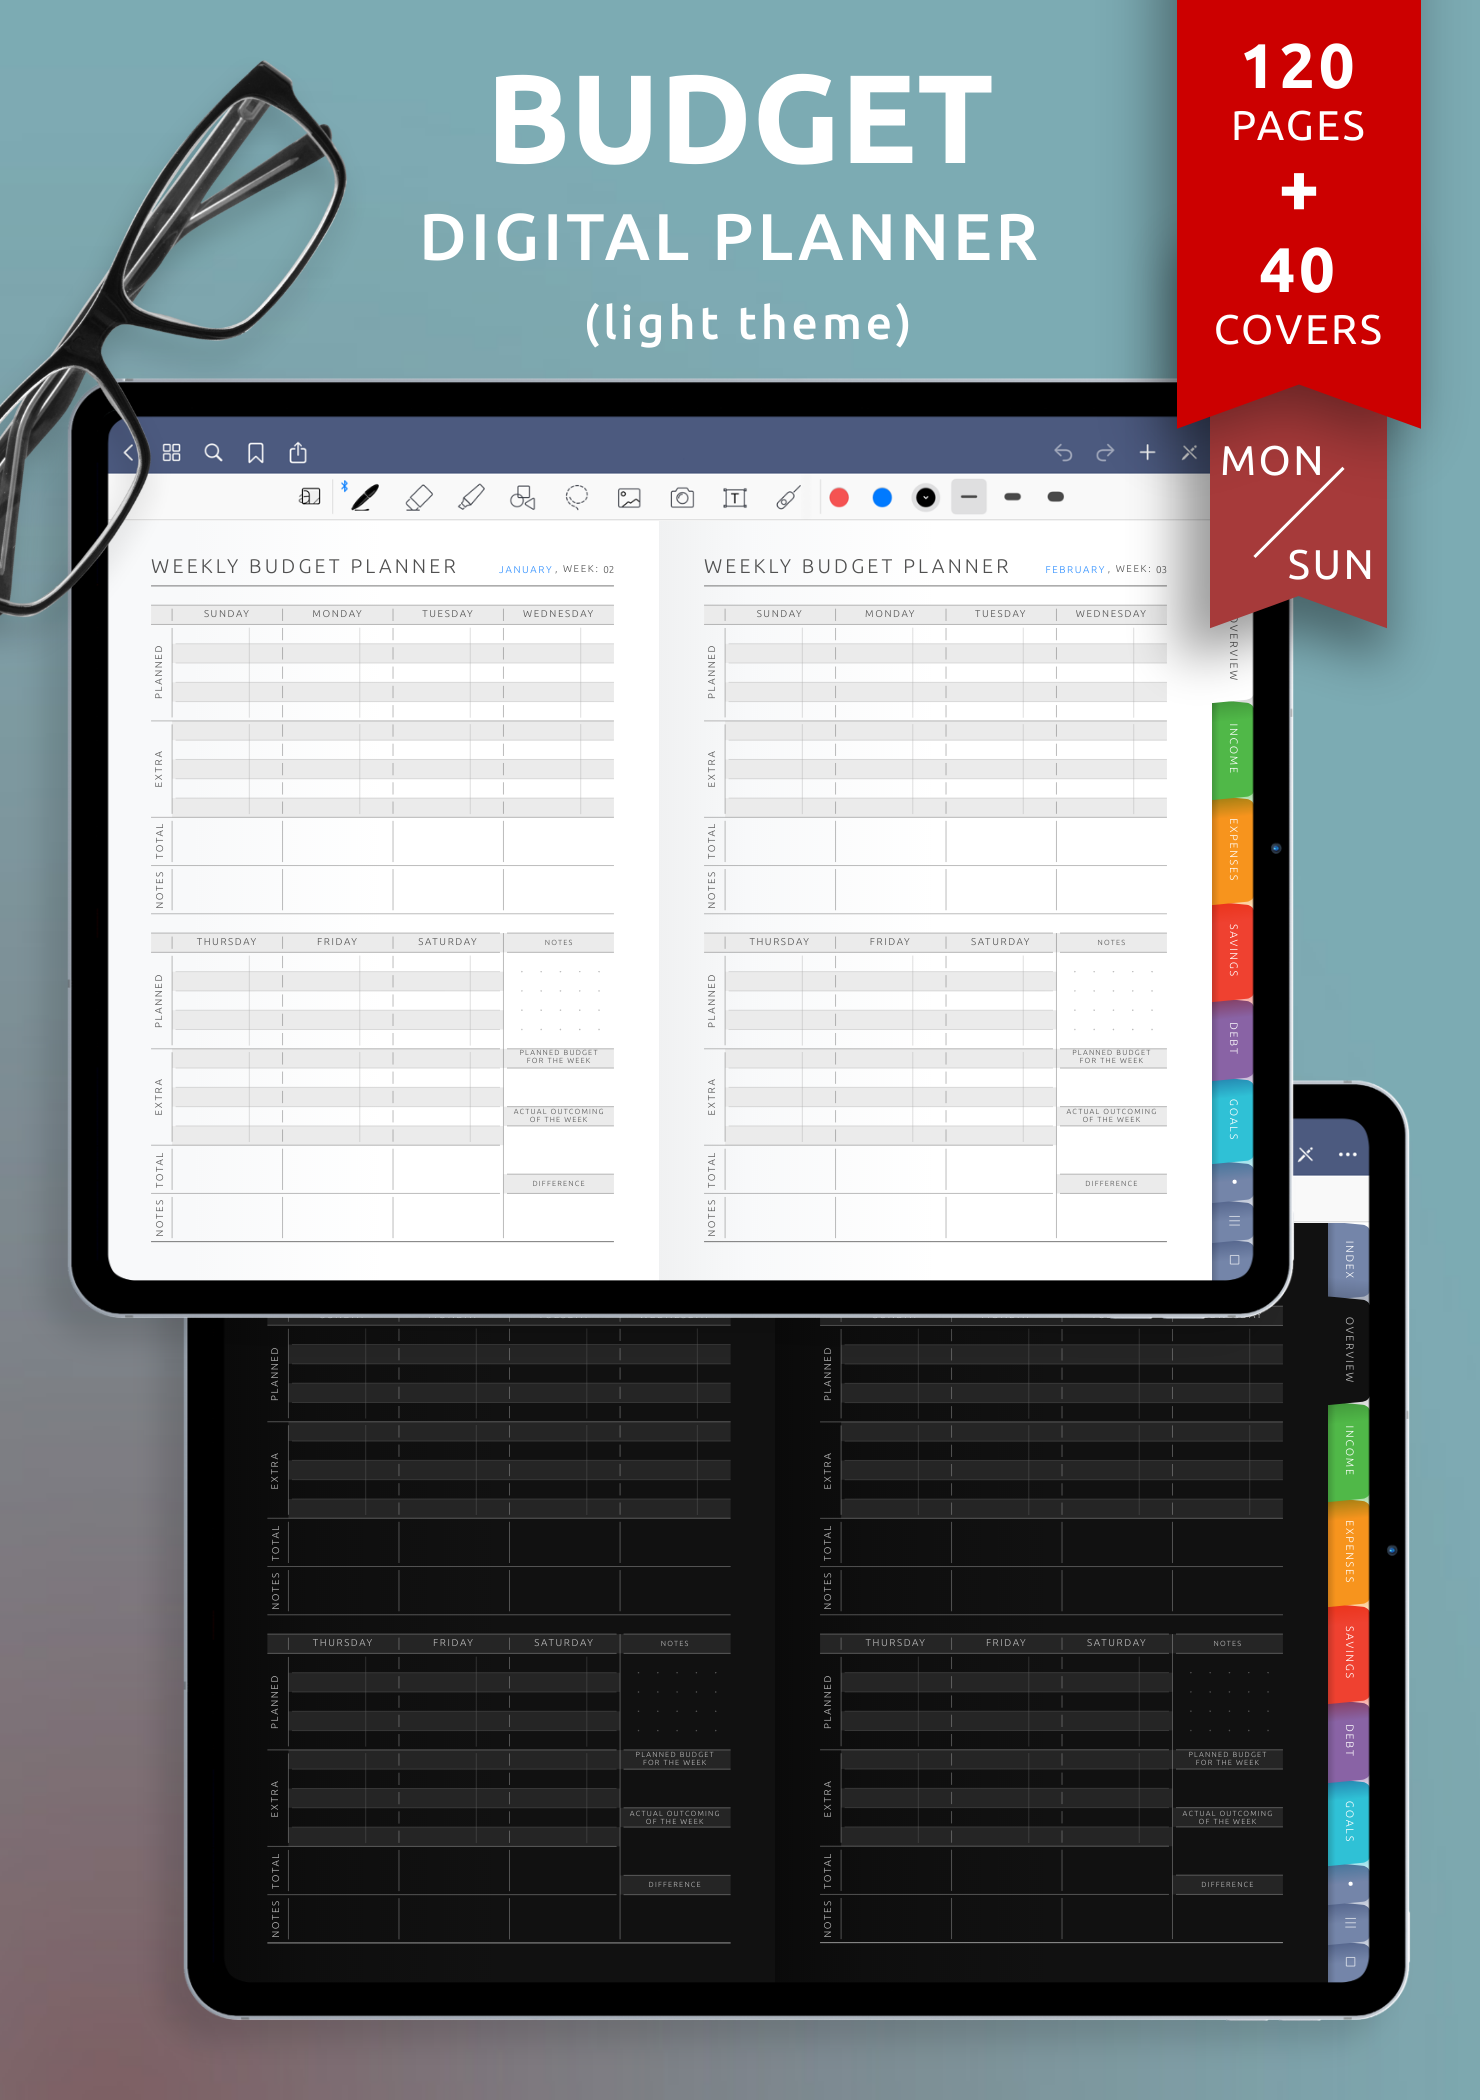 Download Digital Budget Planner for iPad and Android Devices